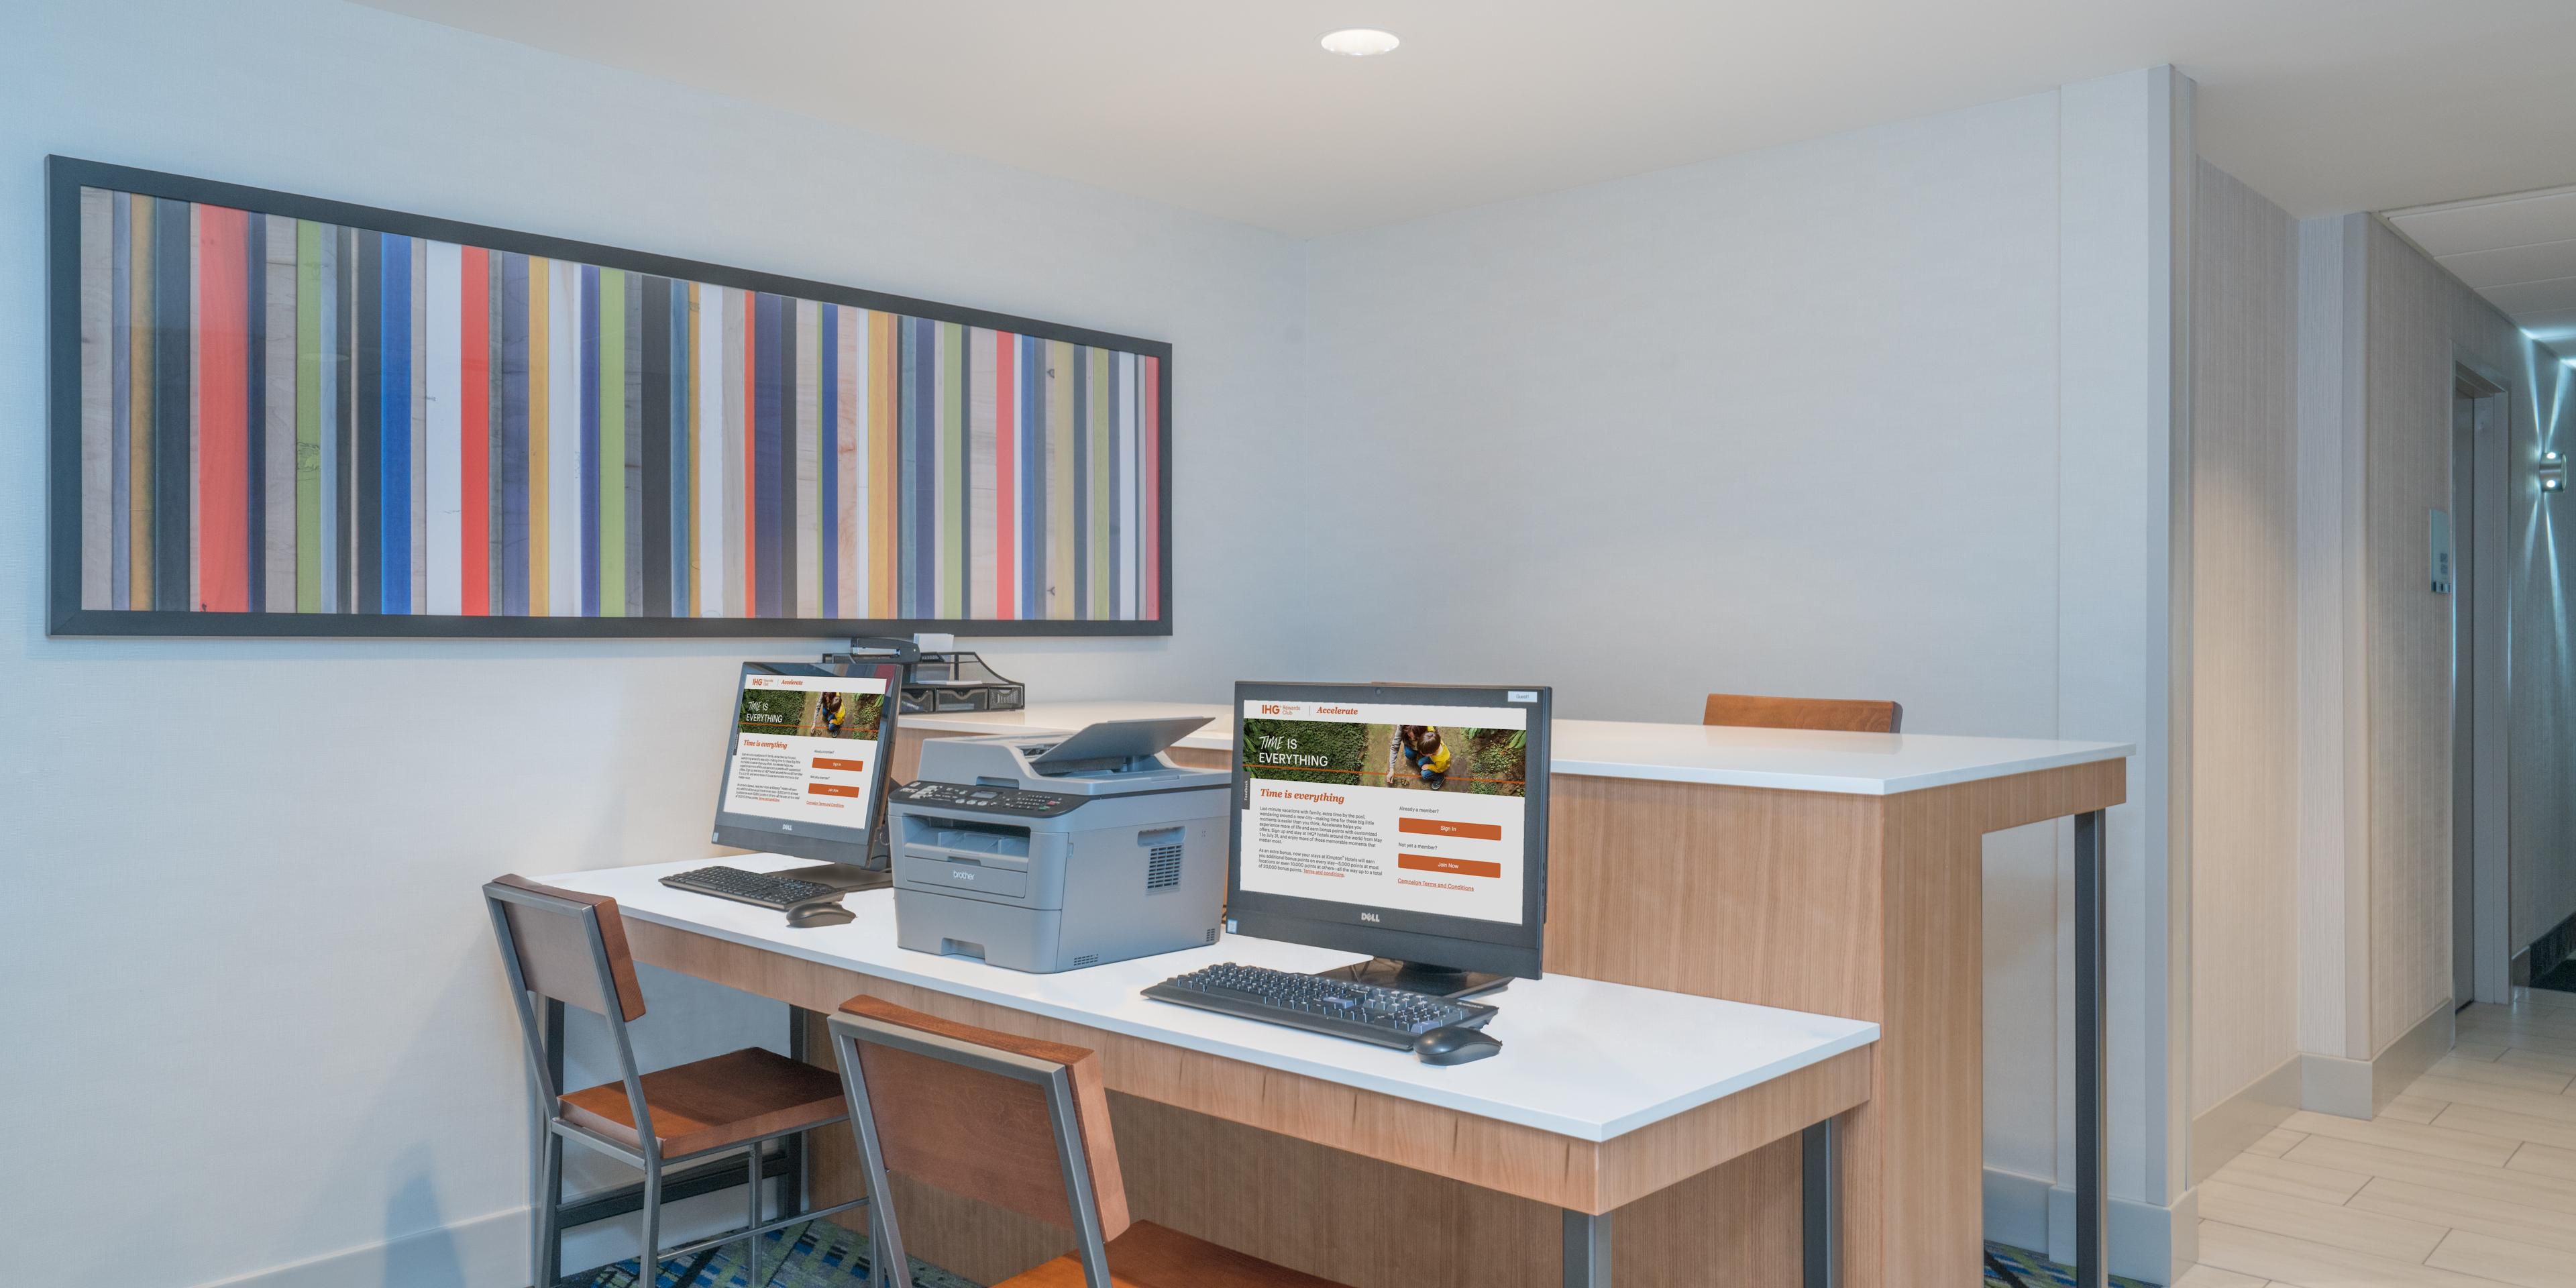 Business services available include on-site business center, printer, copier and office supplies.  Internet access is also available free of charge in all guest rooms. 

